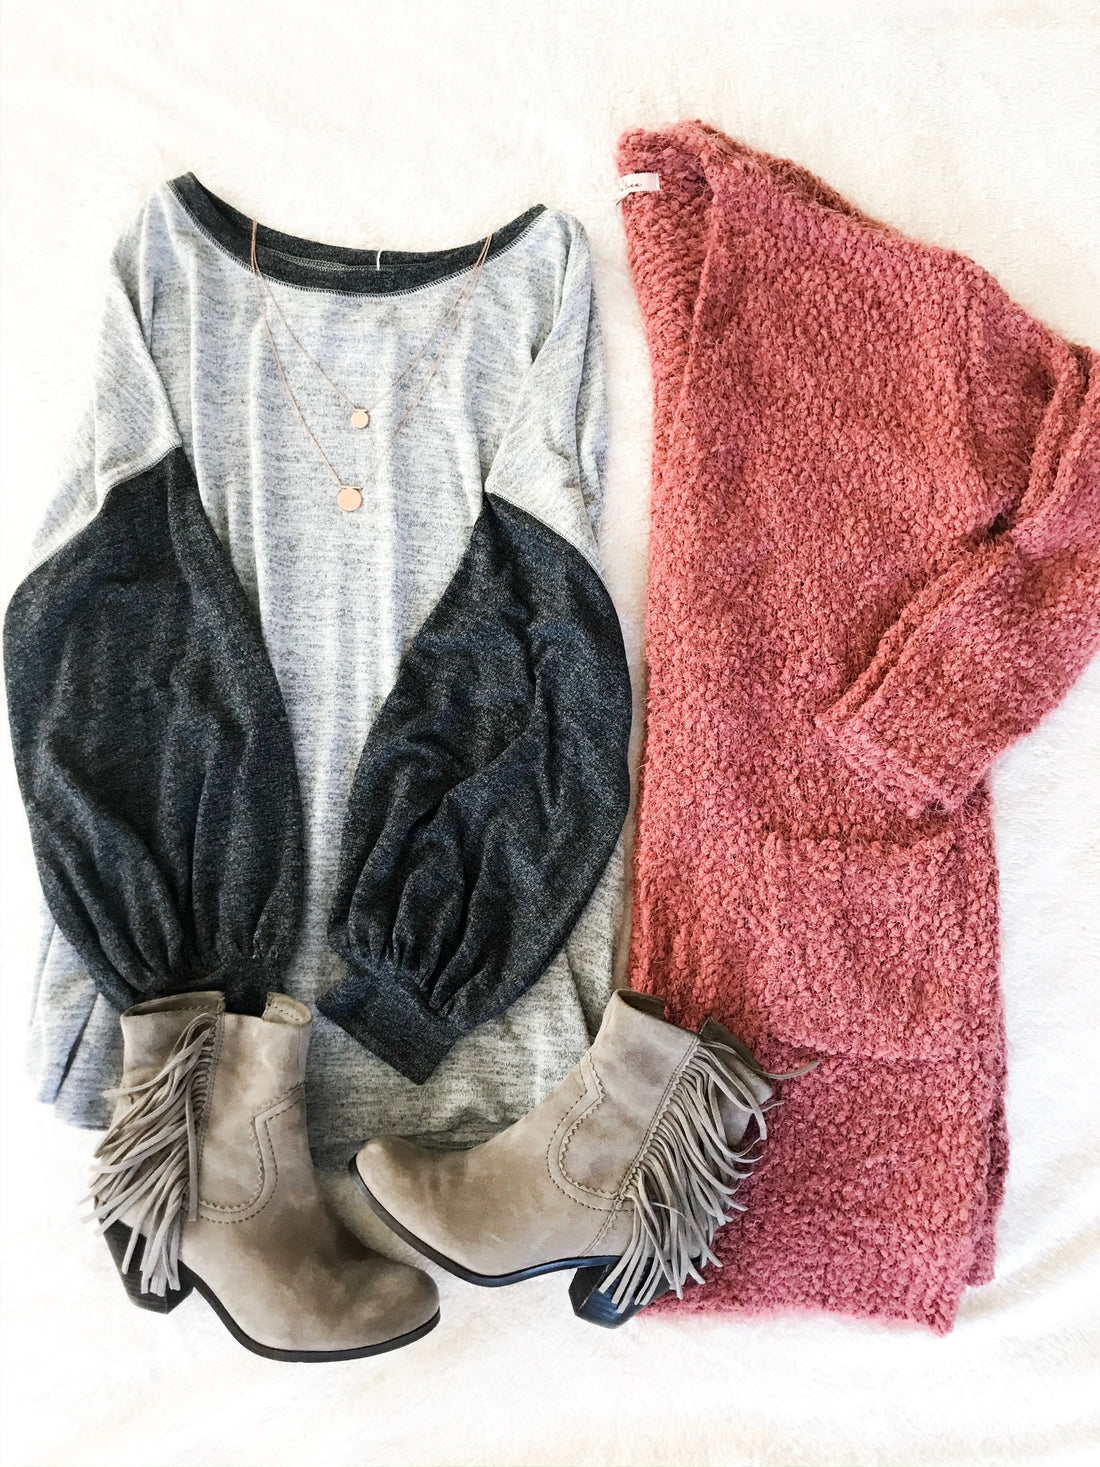 5 COMFY AND CASUAL OUTFIT IDEAS FOR FALL